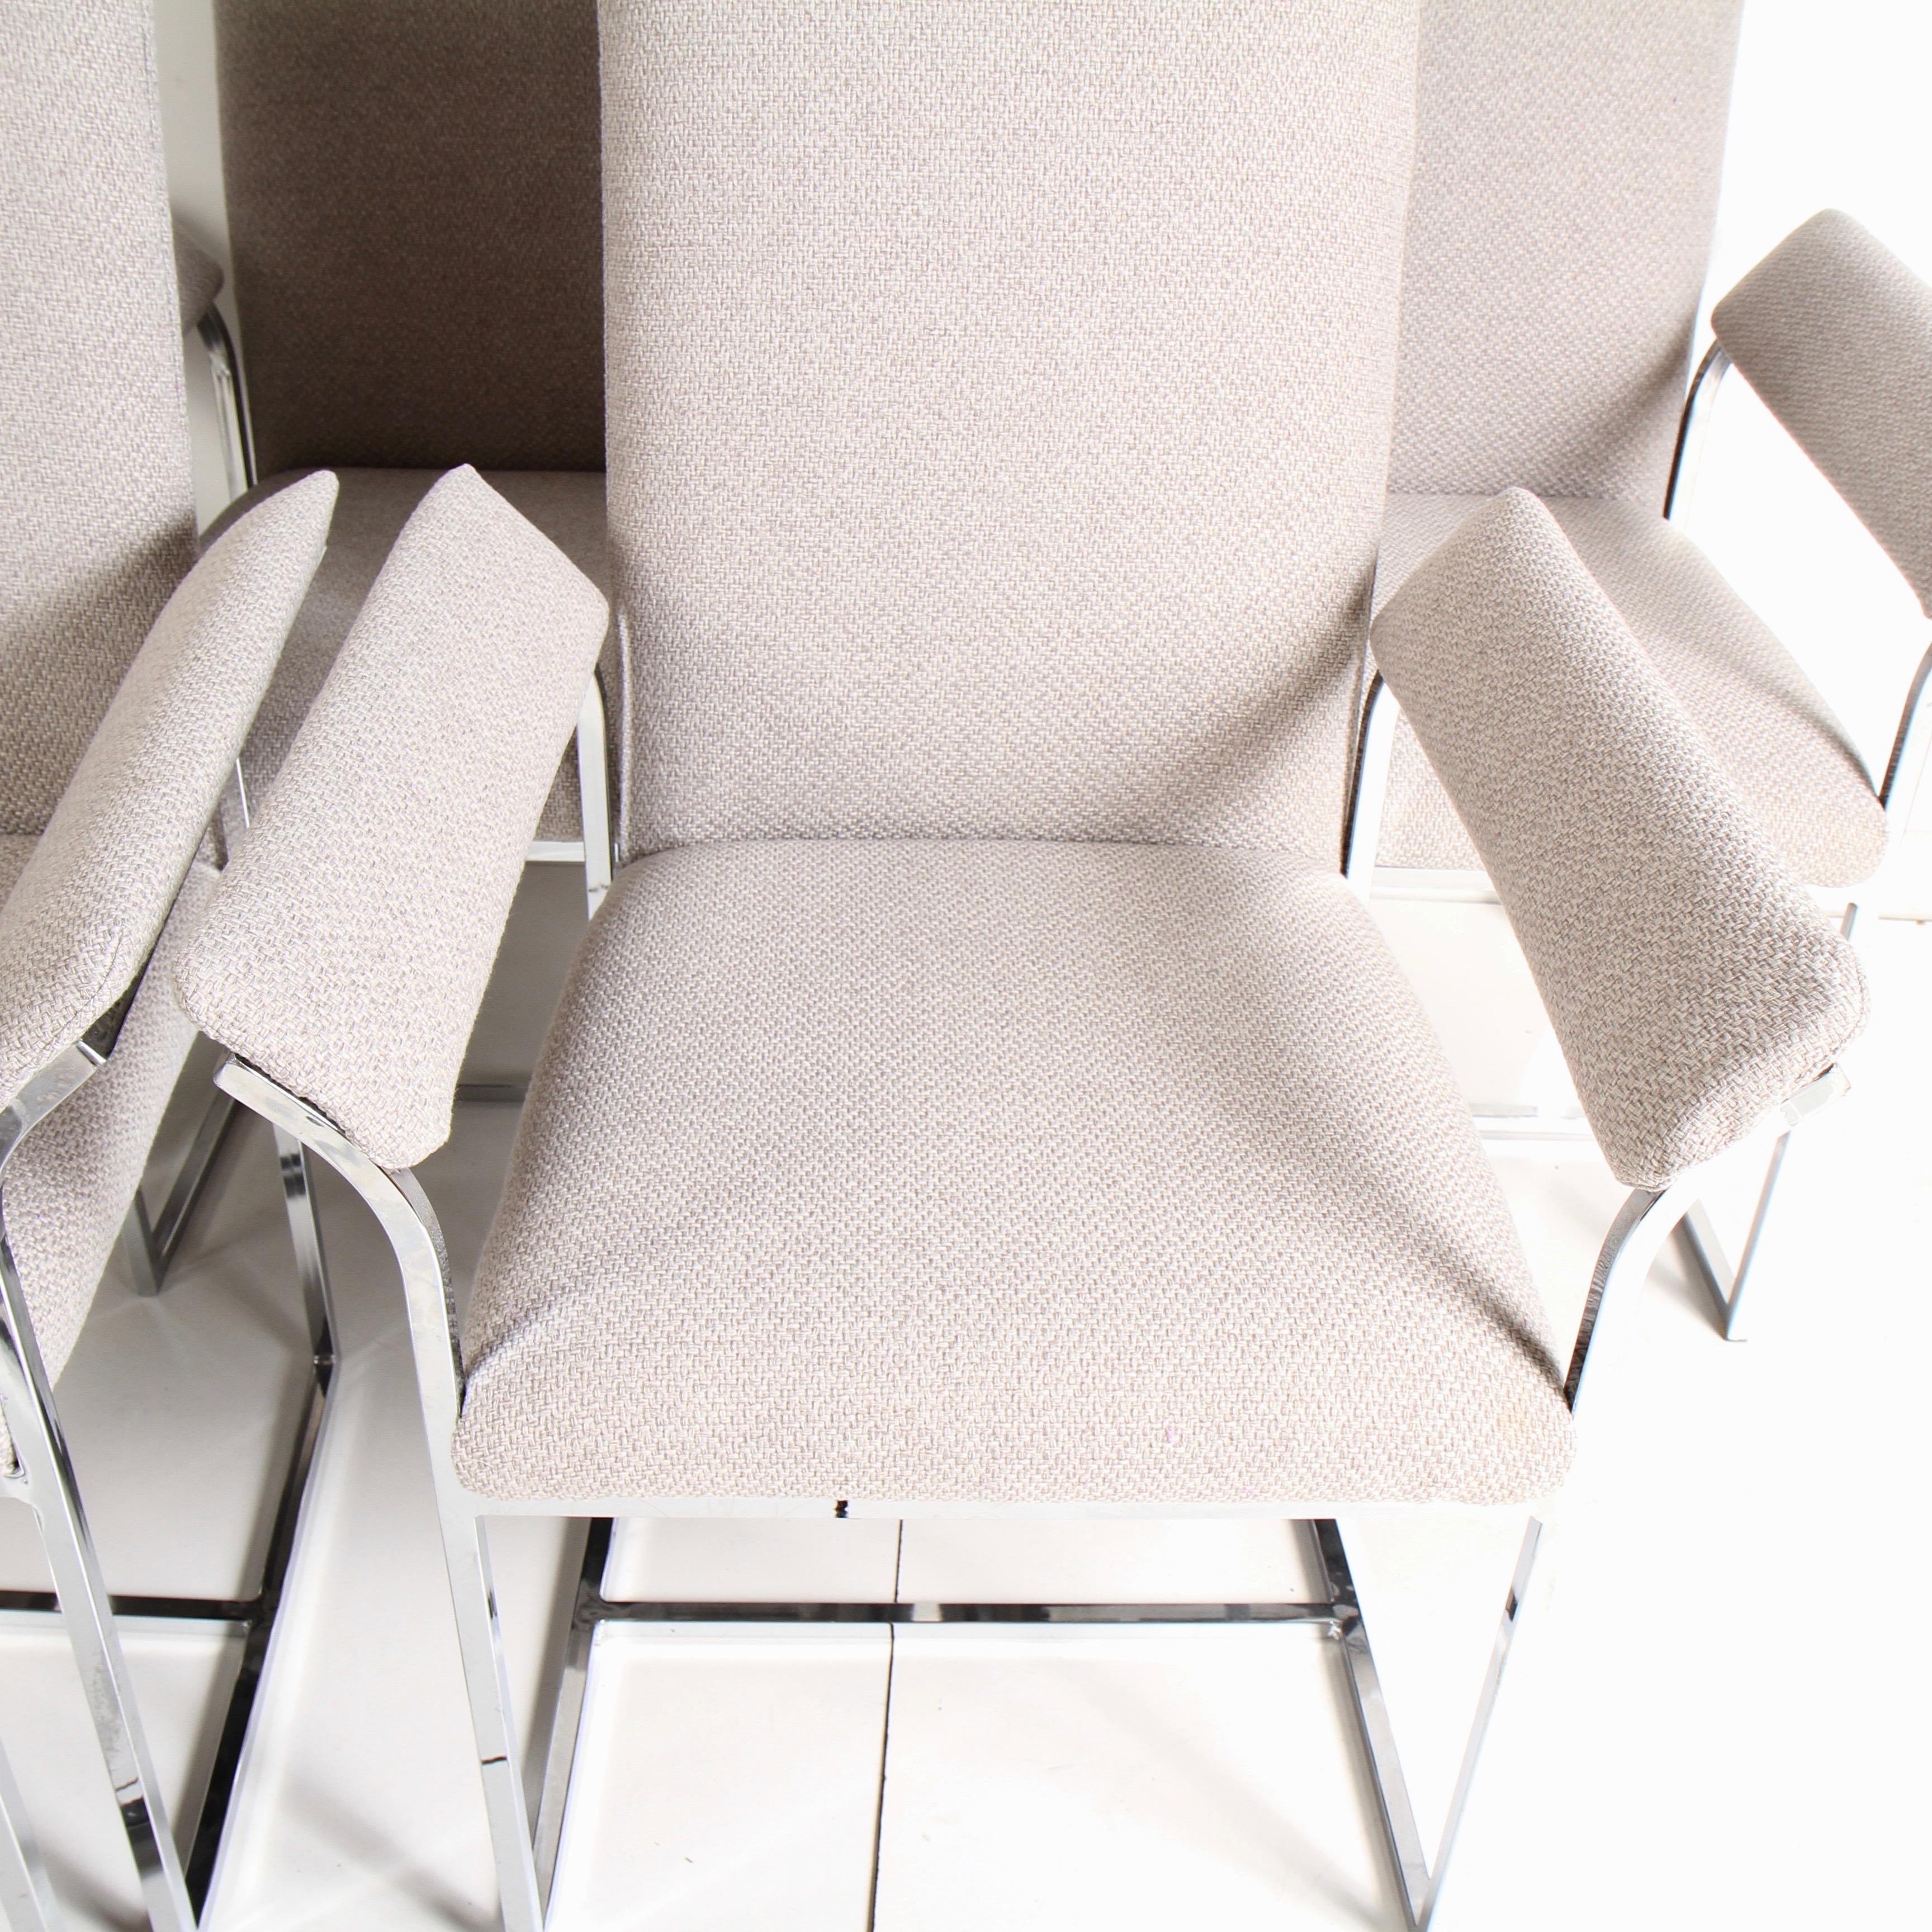 cal style furniture mfg co chairs